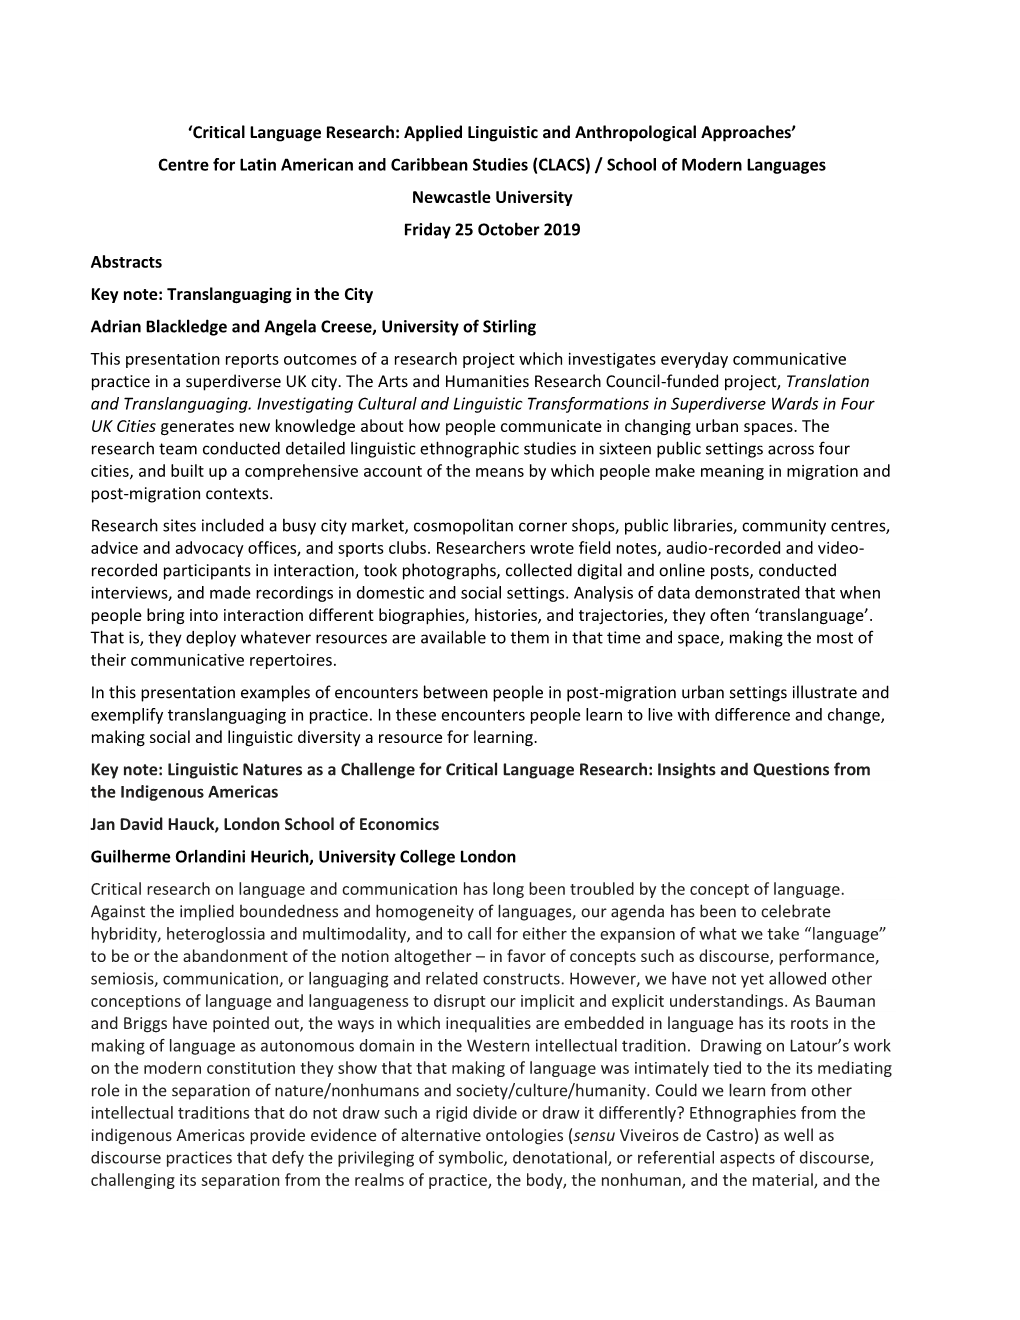 Abstracts: Critical Language Research